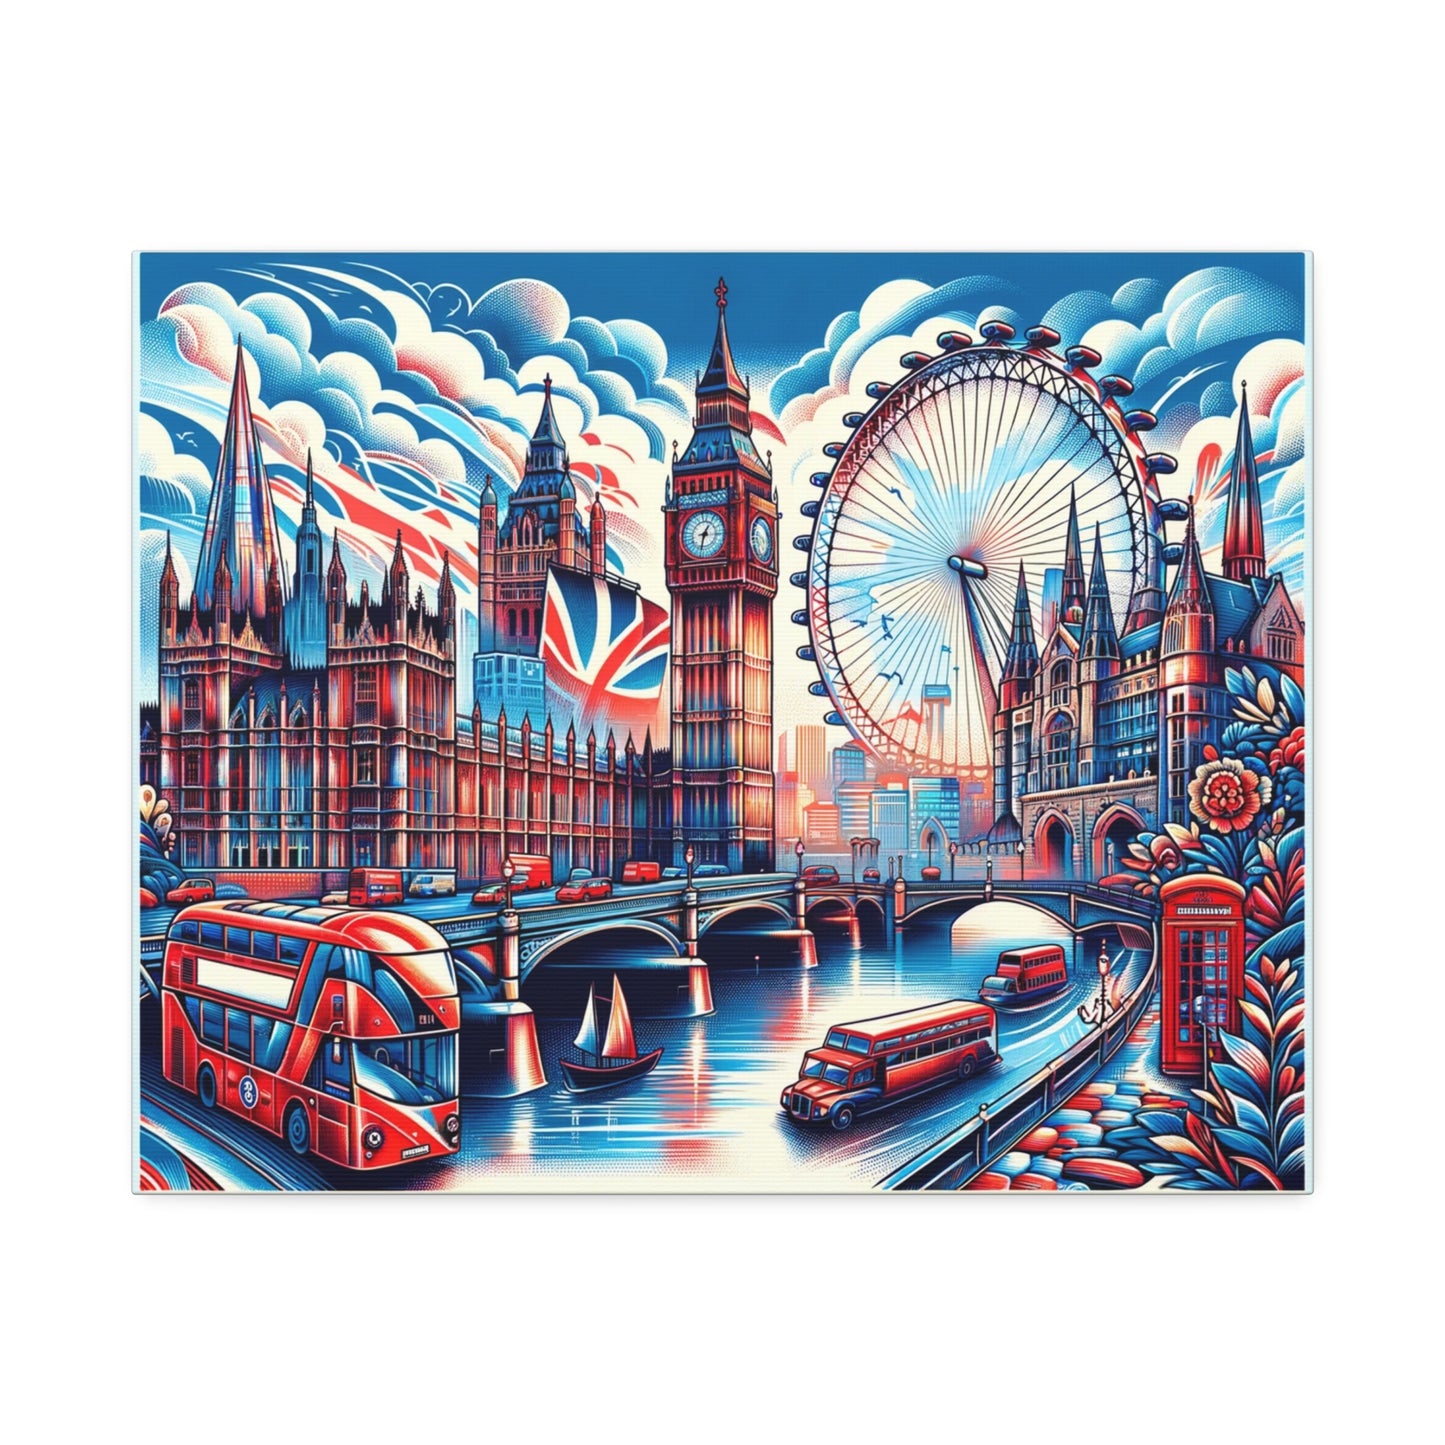 Lively London Cityscape Canvas Art - Iconic Landmarks in Vivid Colors